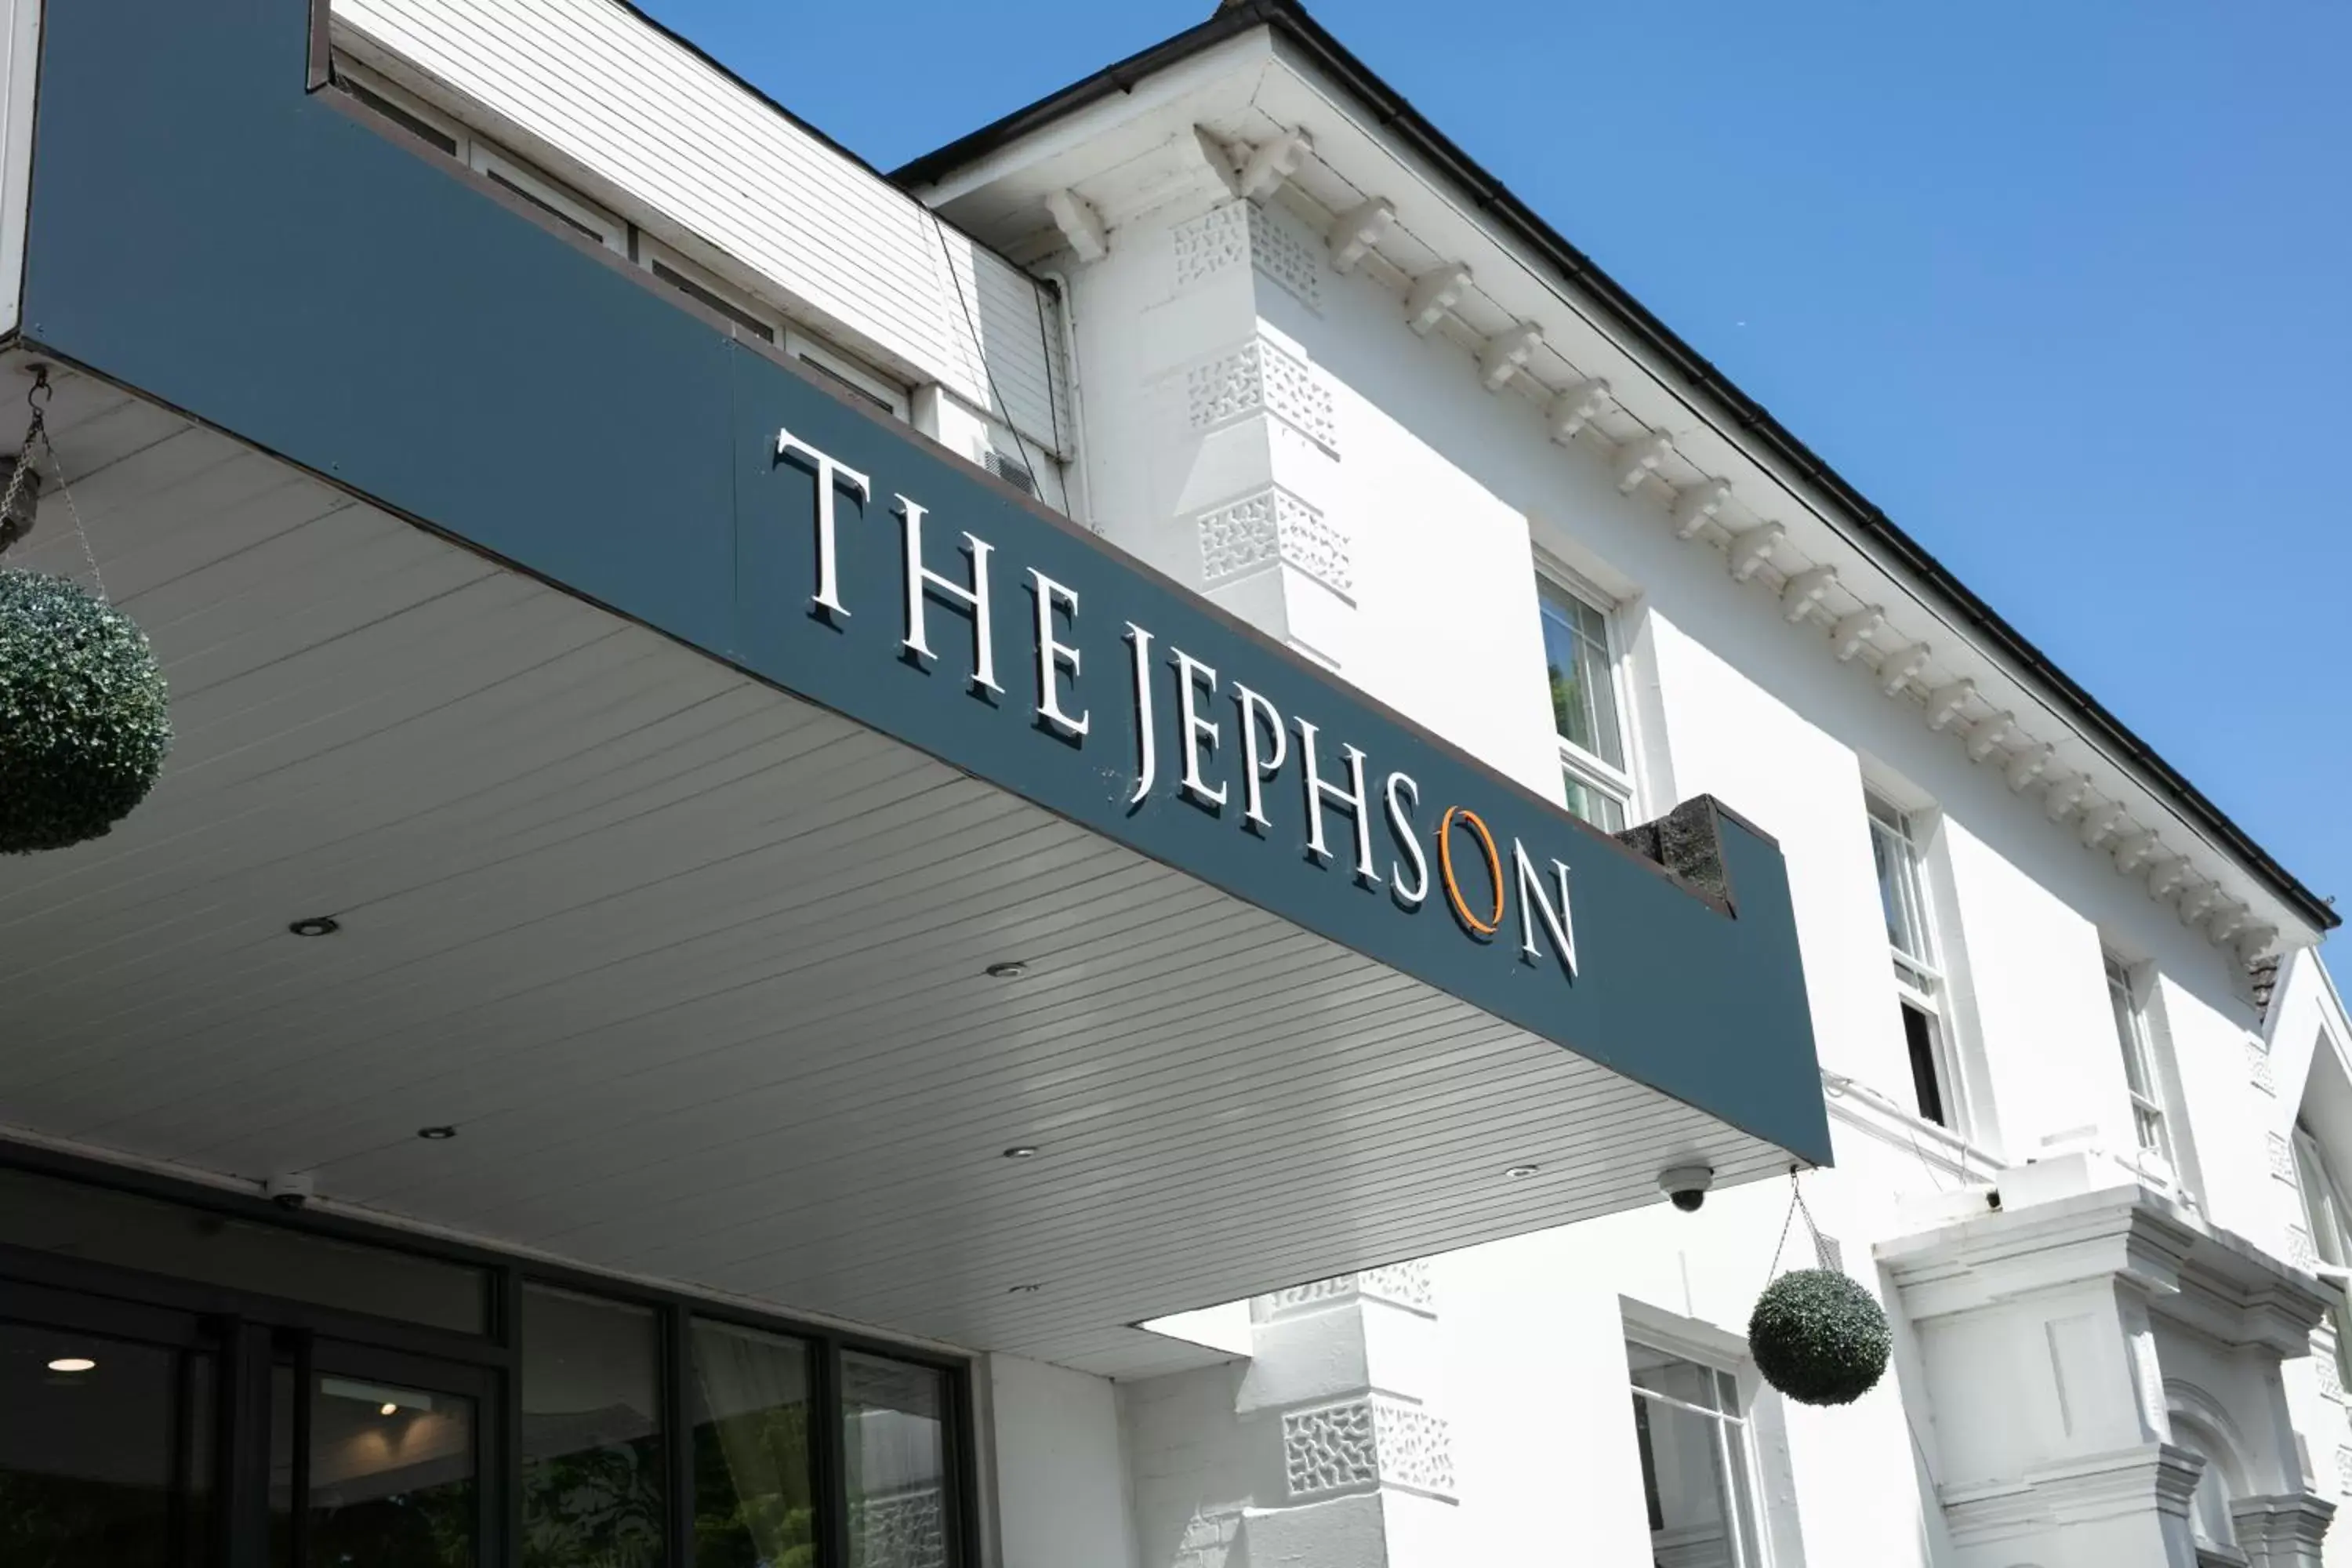 Property logo or sign, Property Building in The Jephson Hotel; BW Signature Collection